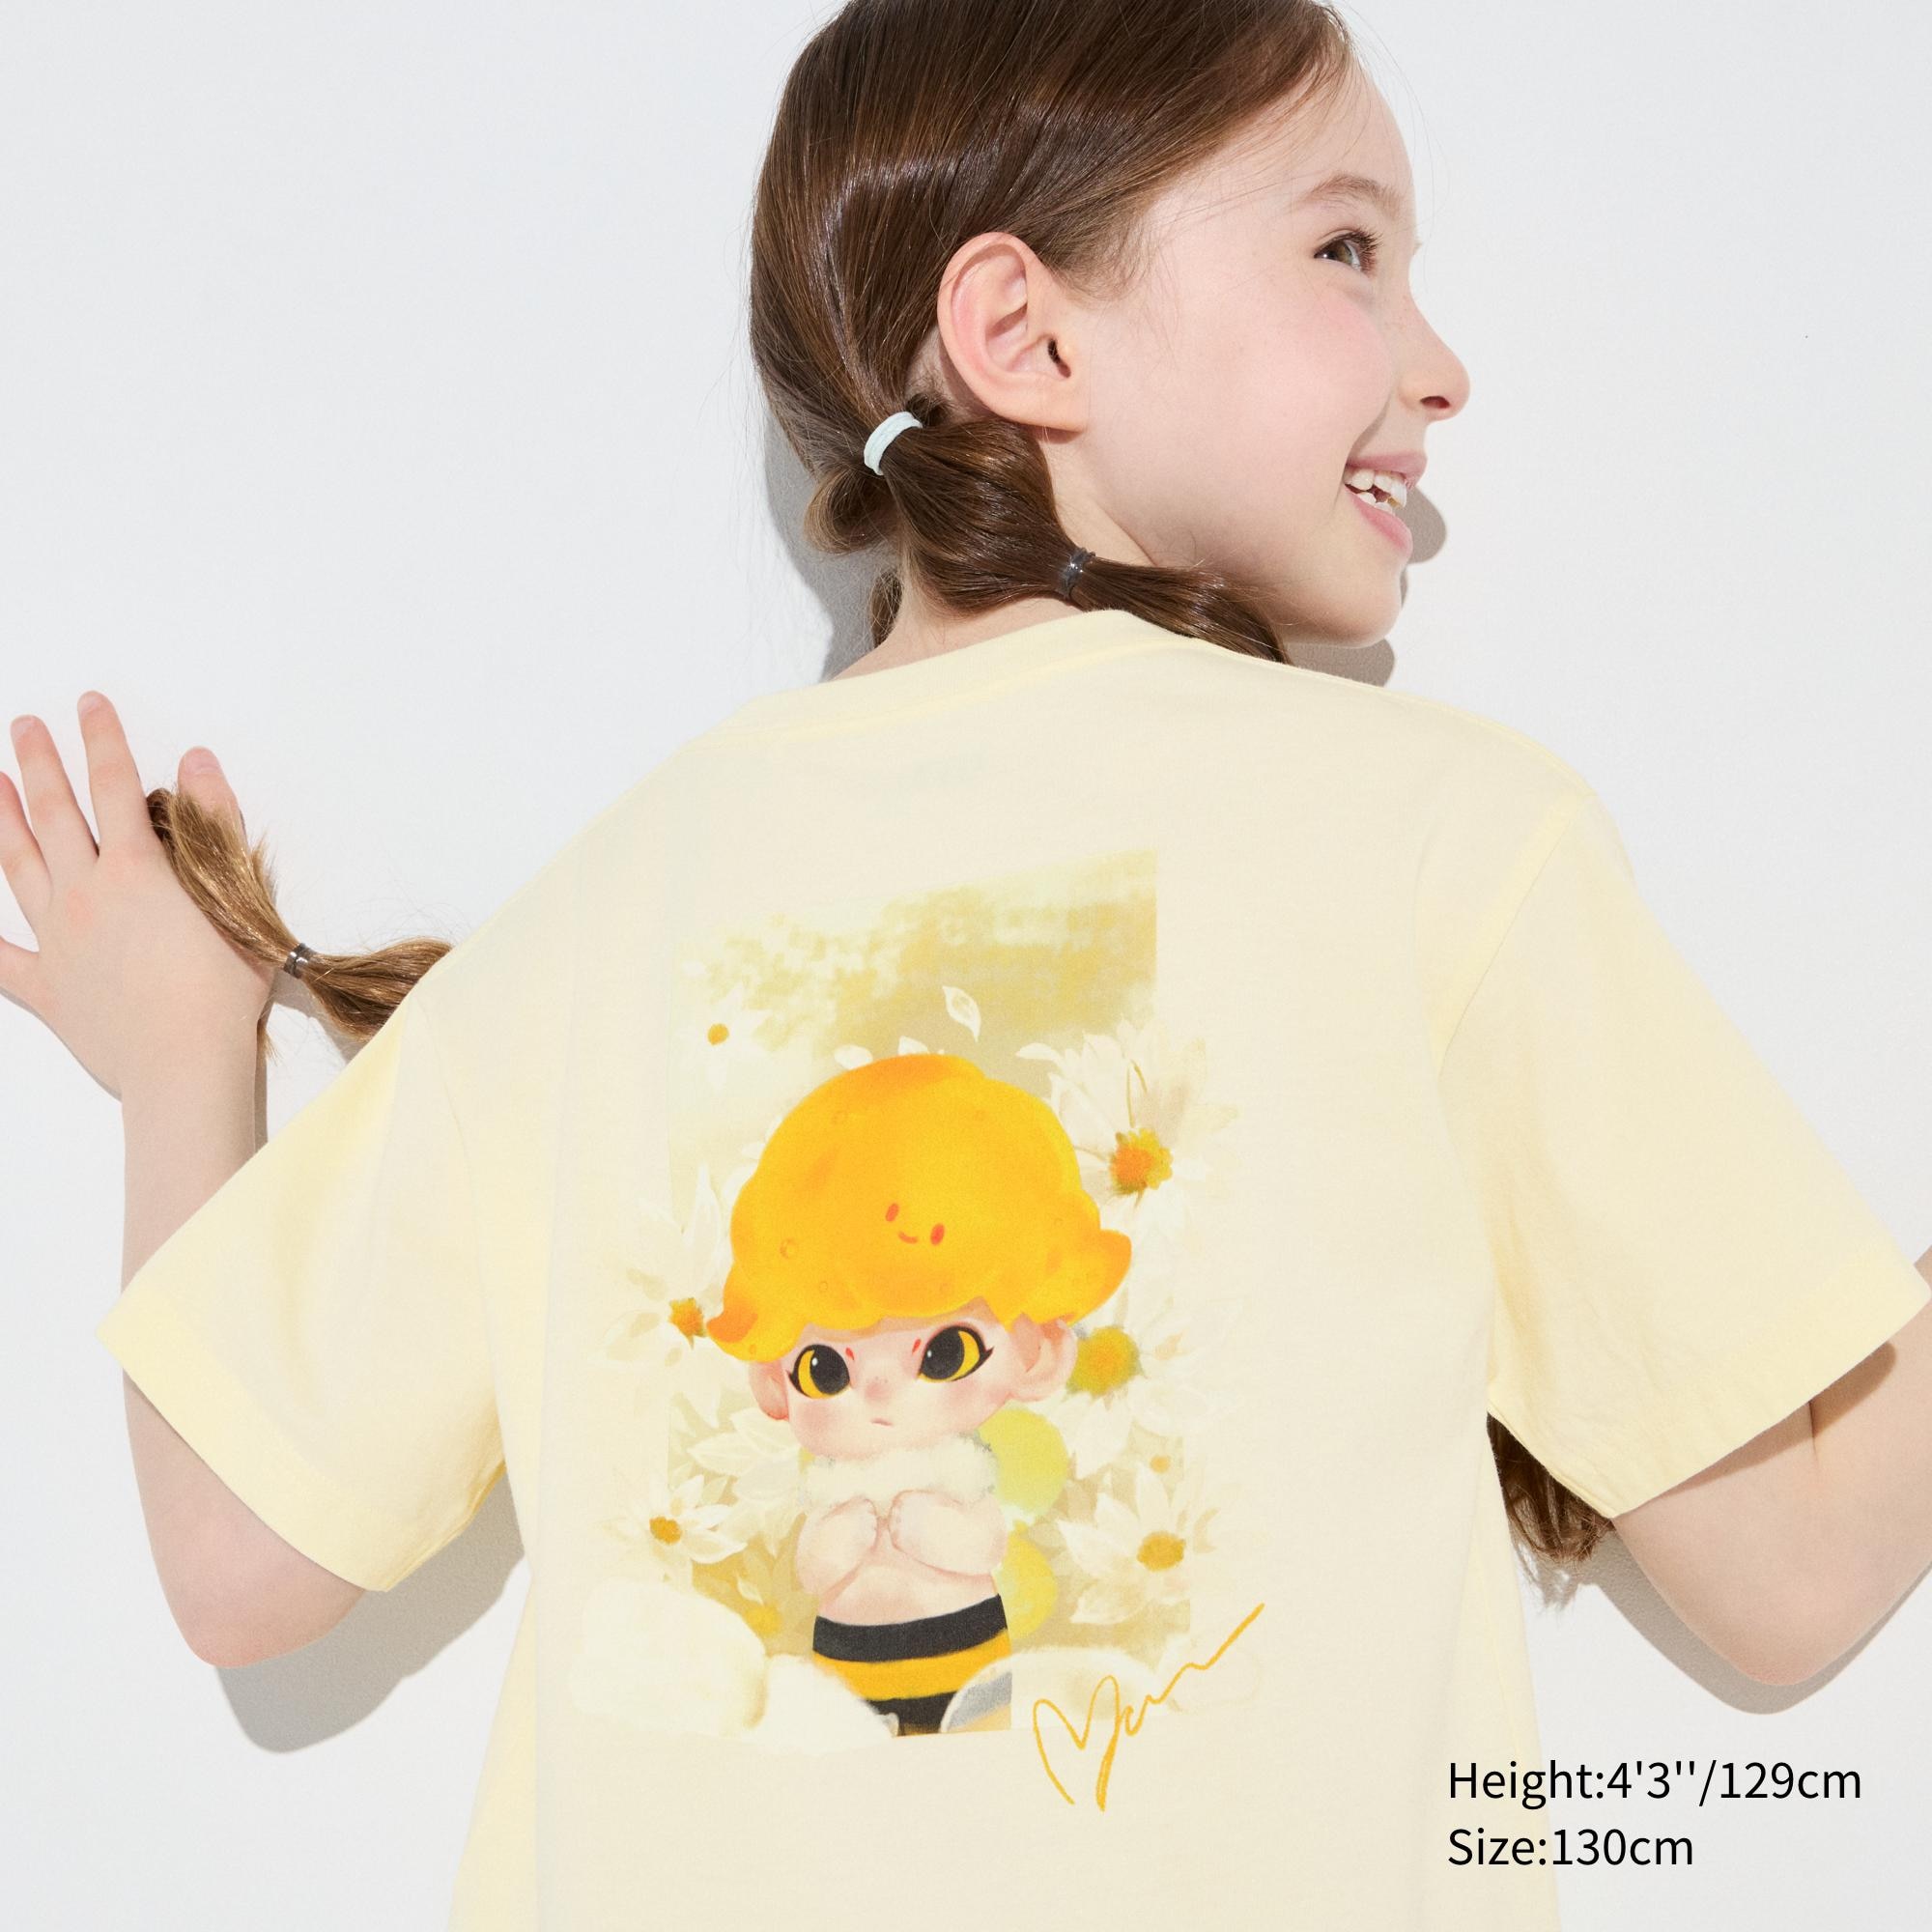 POP MART DIMOO WORLD | UT T-SHIRTS FOR ADULTS AND KIDS | UNIQLO SG